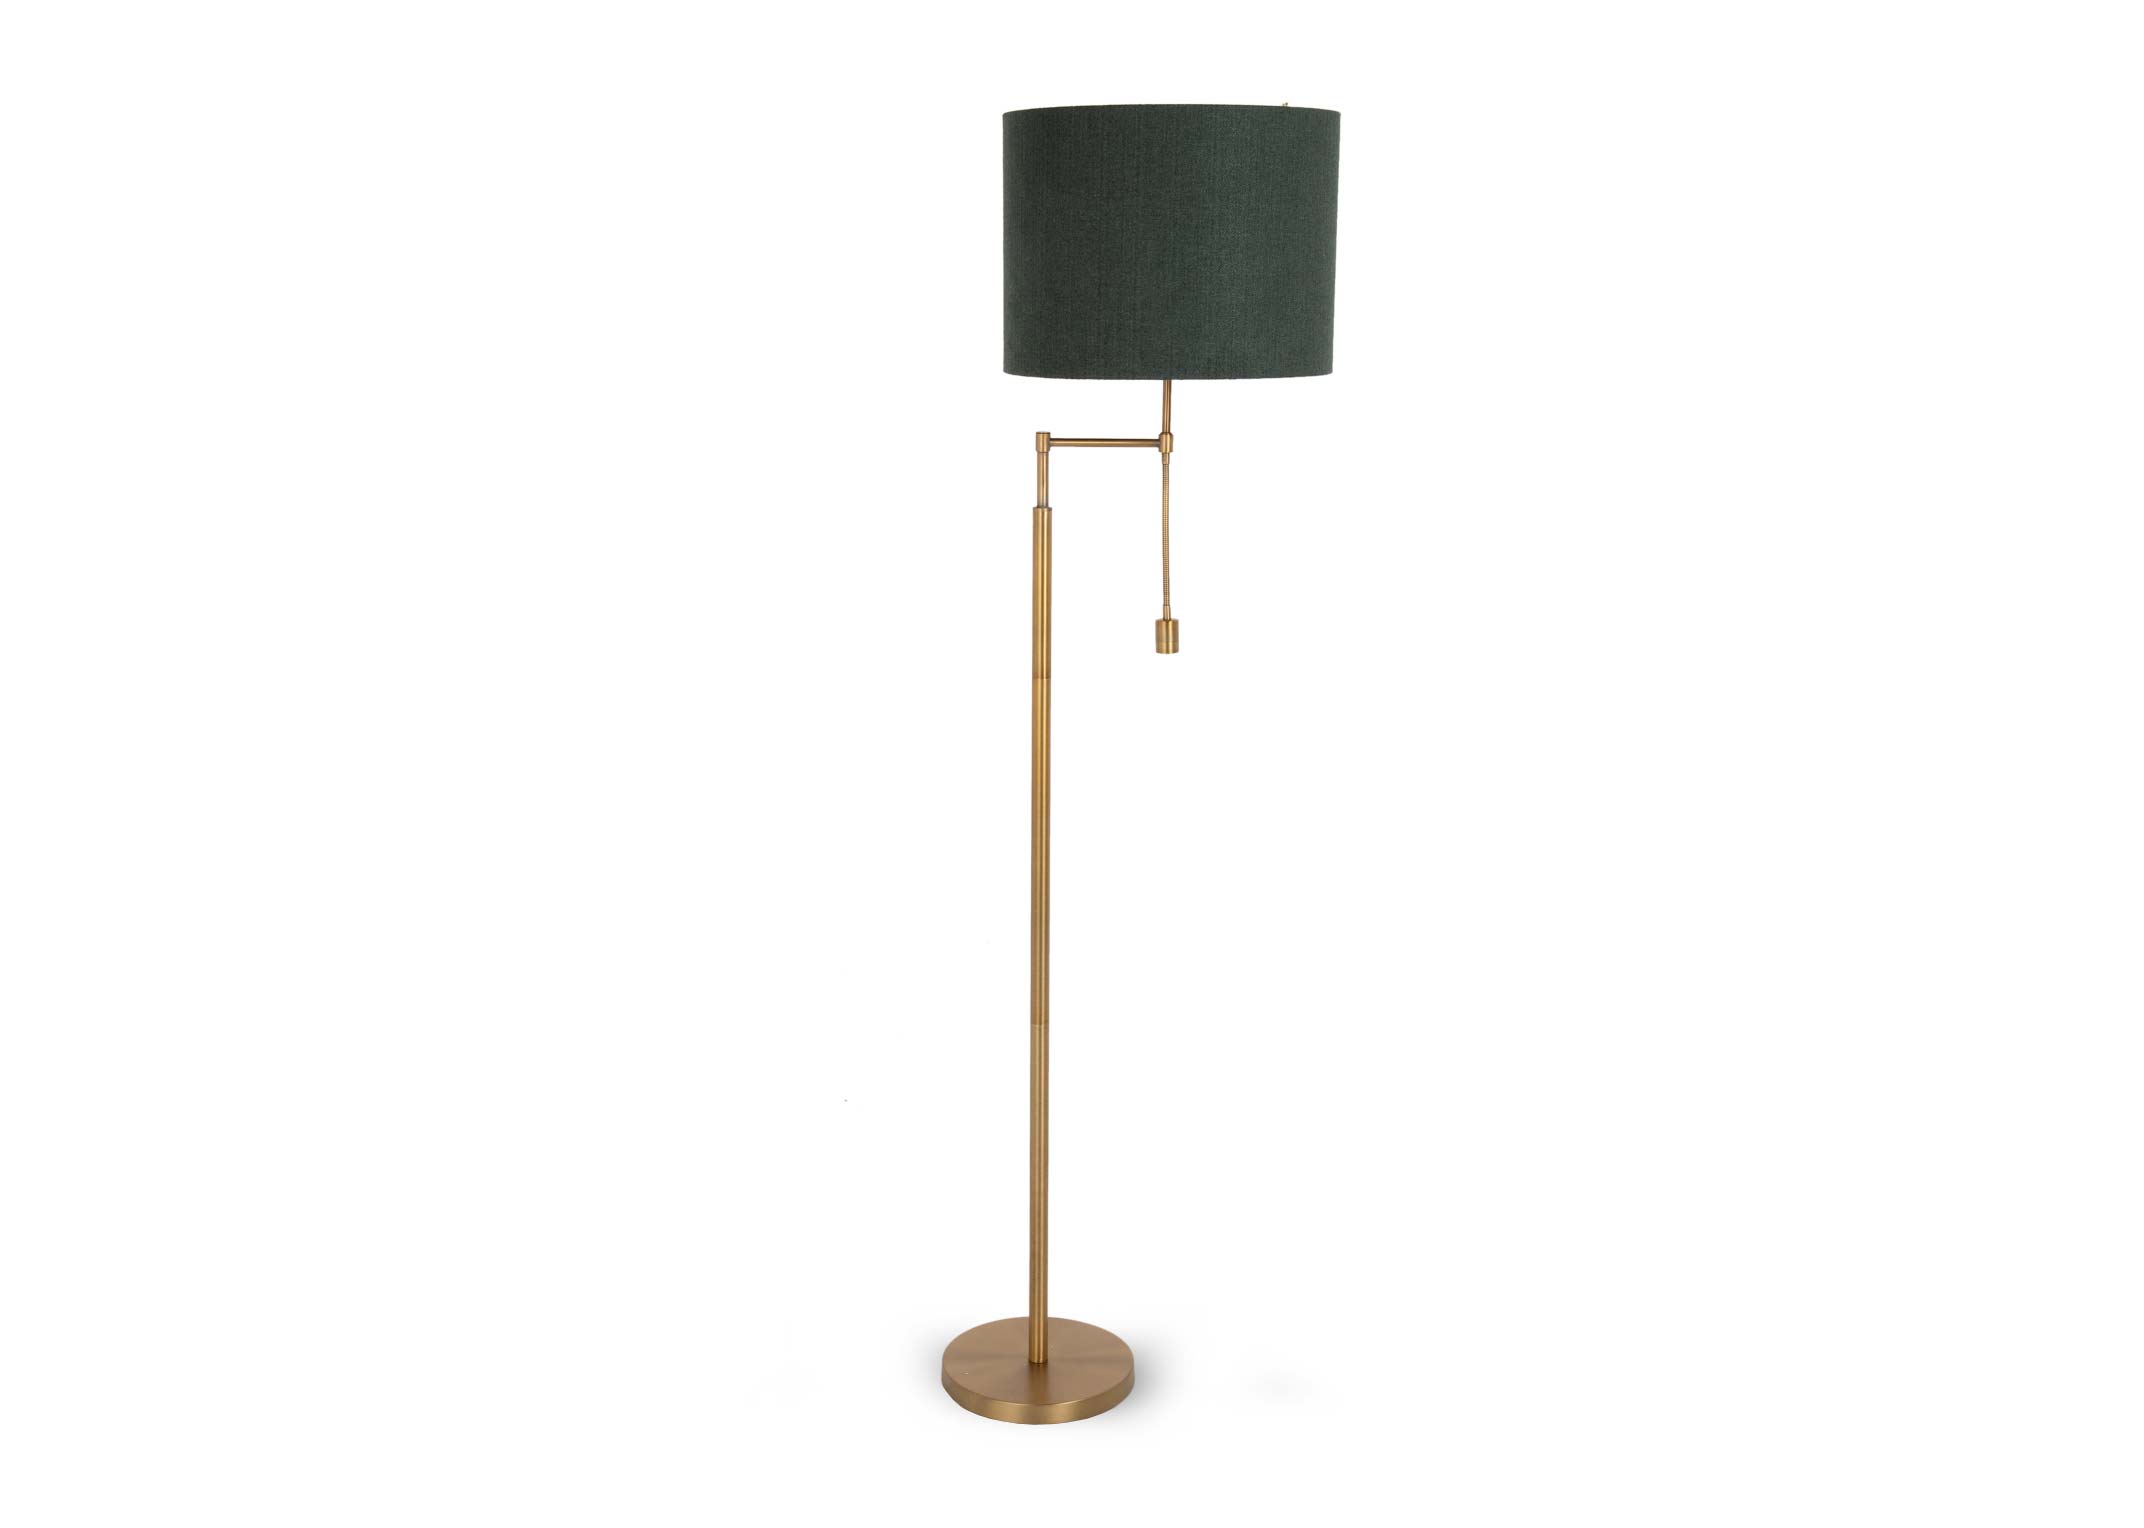 Antique Brass Floor Lamp with Green Shade and Reading Light